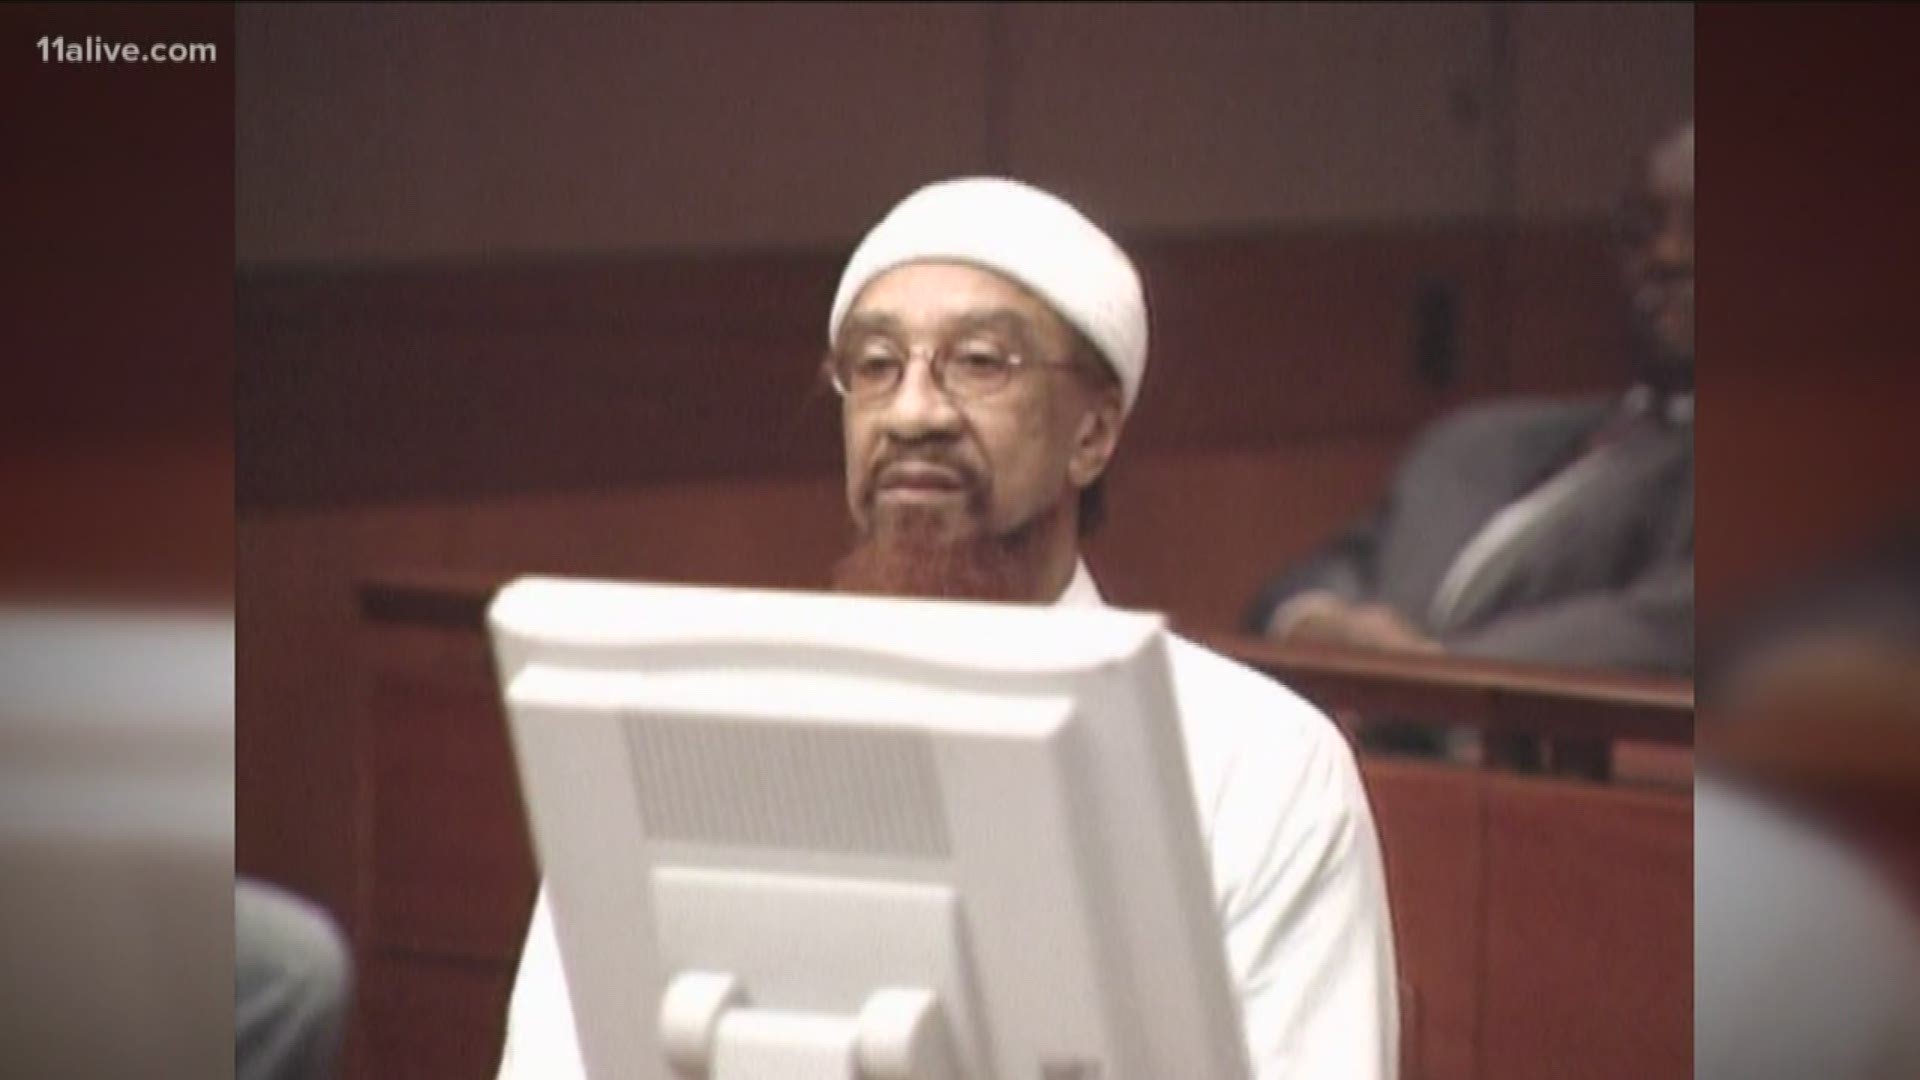 Muslim cleric and civil rights leader Jamil Al-Amin takes up fight in another shot at freedom.